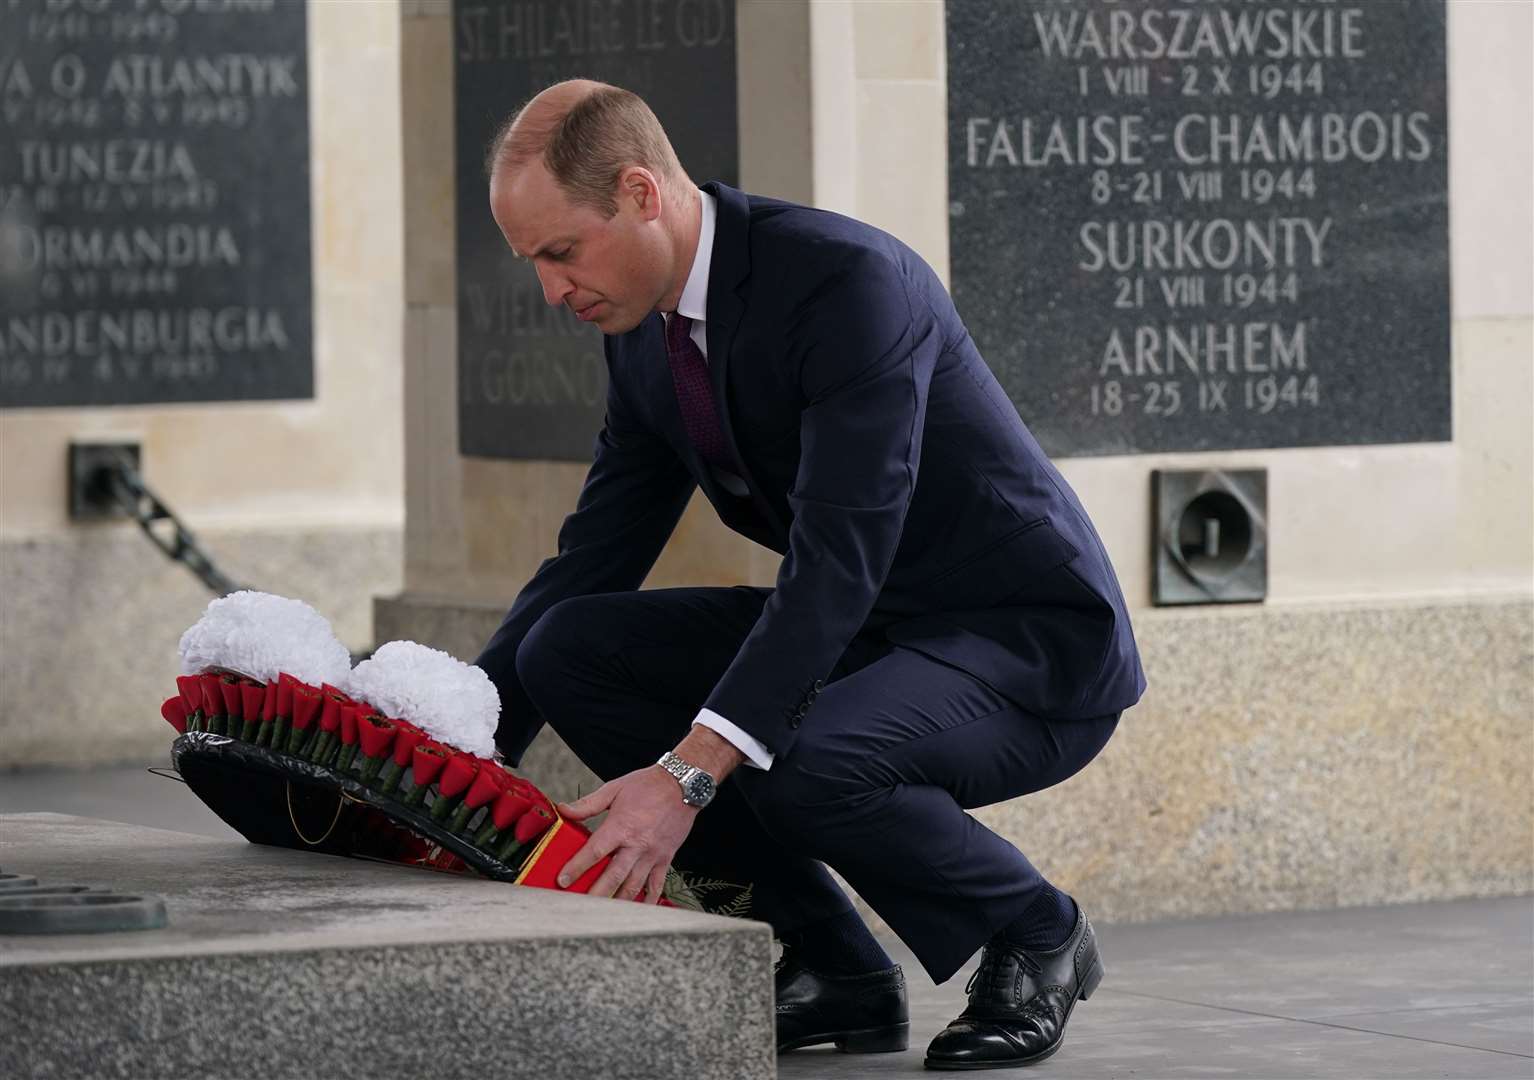 The Prince of Wales lays a wreath at the Tomb of the Unknown Soldier, a monument dedicated to Polish soldiers who lost their lives in conflict, during his visit to Warsaw (Yui Mok/PA)